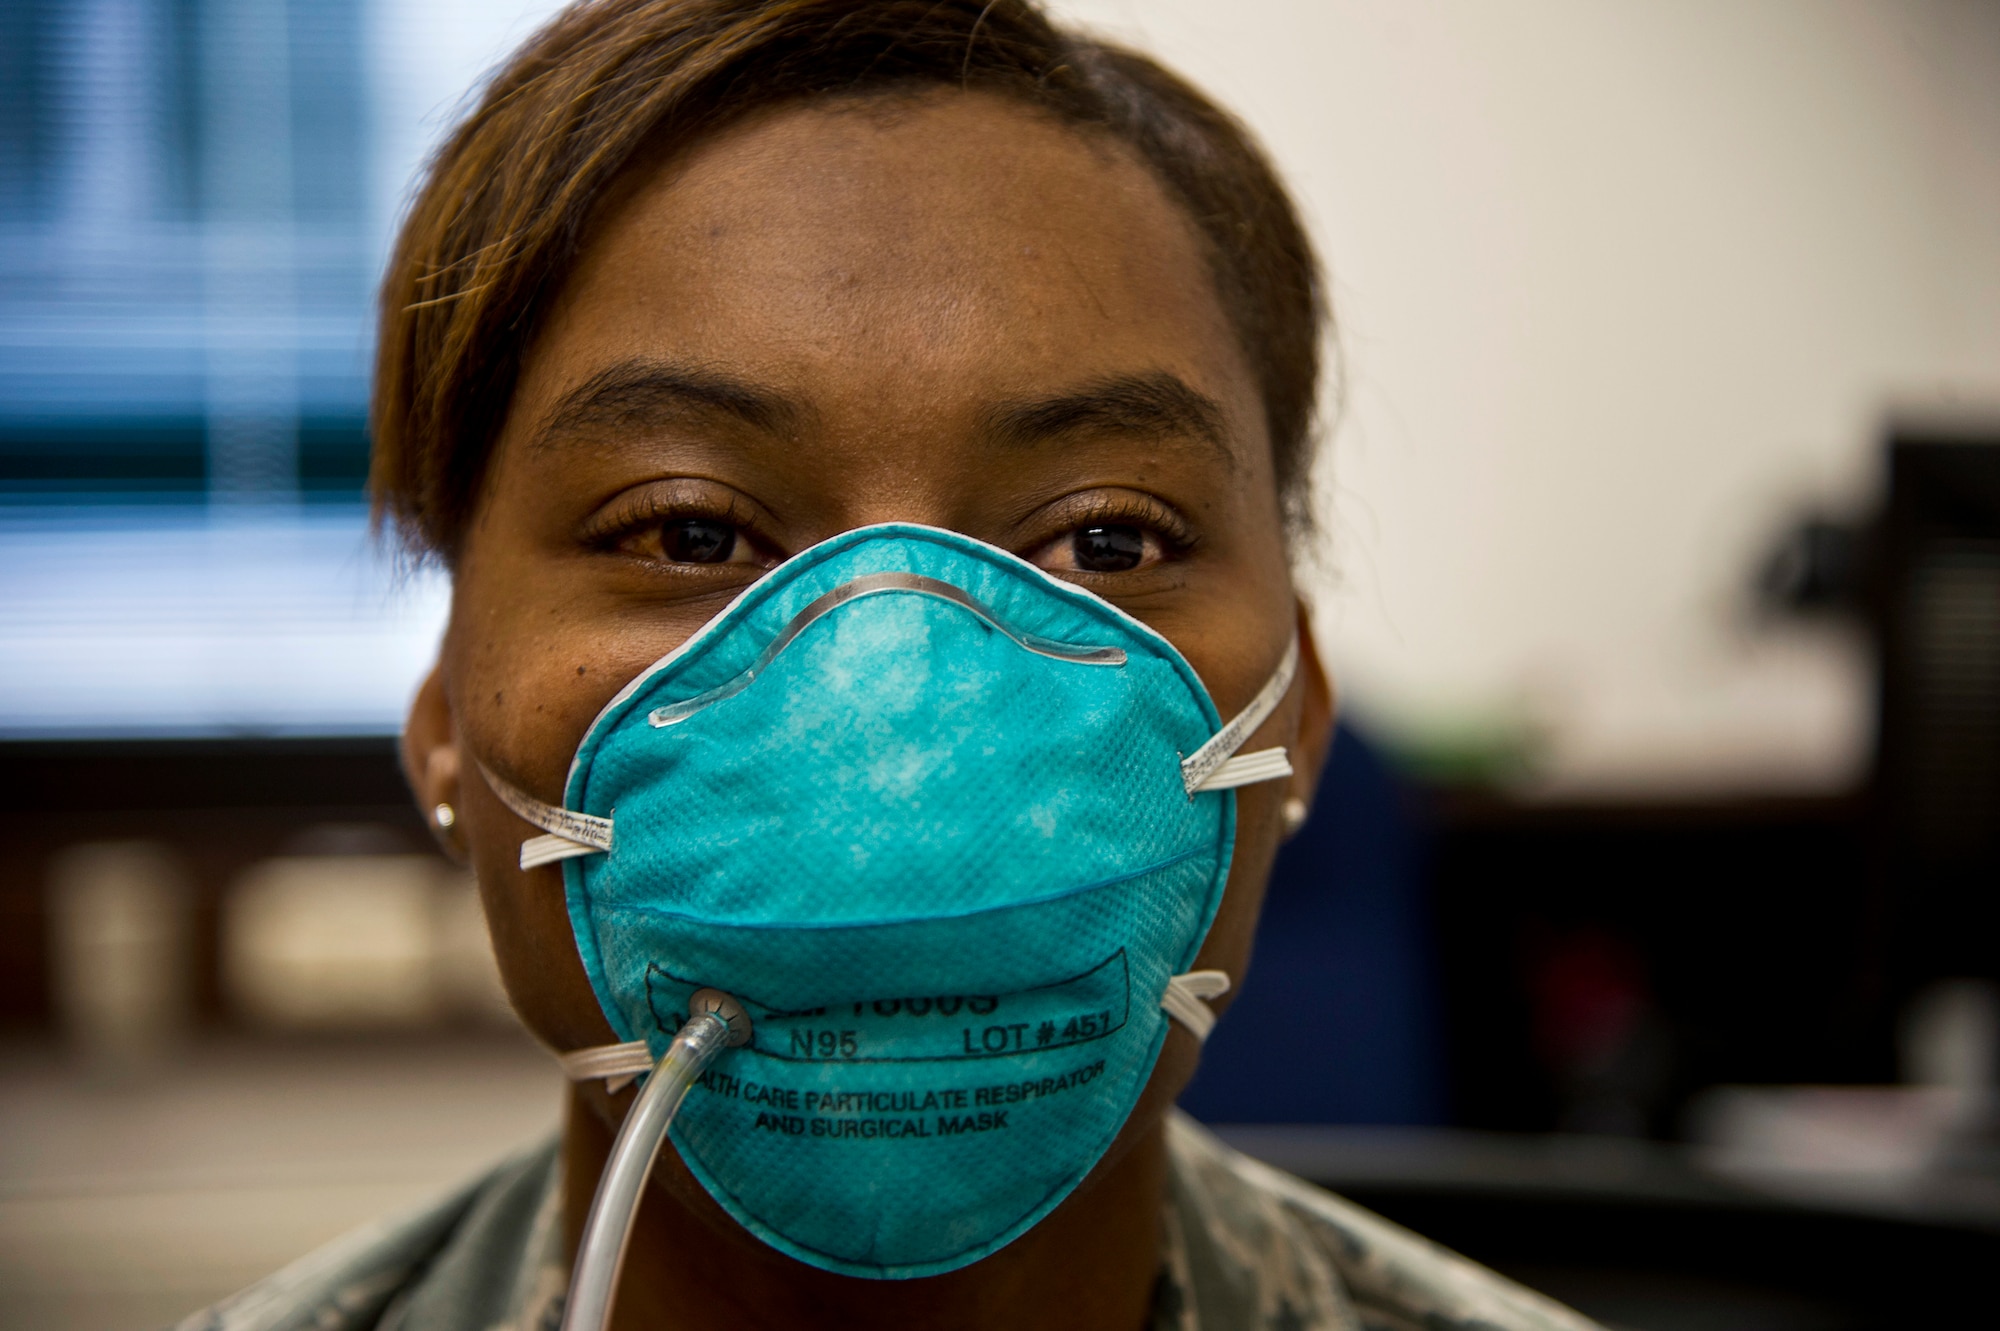 Tech. Sgt. Saquadrea Crosby, 86th Aerospace Medicine Squadron public health NCOIC, gets fitted for an N95 respirator by 86th Bioenvironmental Engineering flight at Ramstein Air Base, Germany, Oct. 17, 2014. The N95 respirator is a device that is used to help prevent the spread of germs (viruses and bacteria) from one person to another. As members of the 86th Airlift Wing continue to support missions for Operation United Assistance, Airmen who are expected to interact with returnees from Ebola infected areas will be fitted for the N95 respirators. (U.S. Air Force photo by Staff Sgt. Sara Keller)